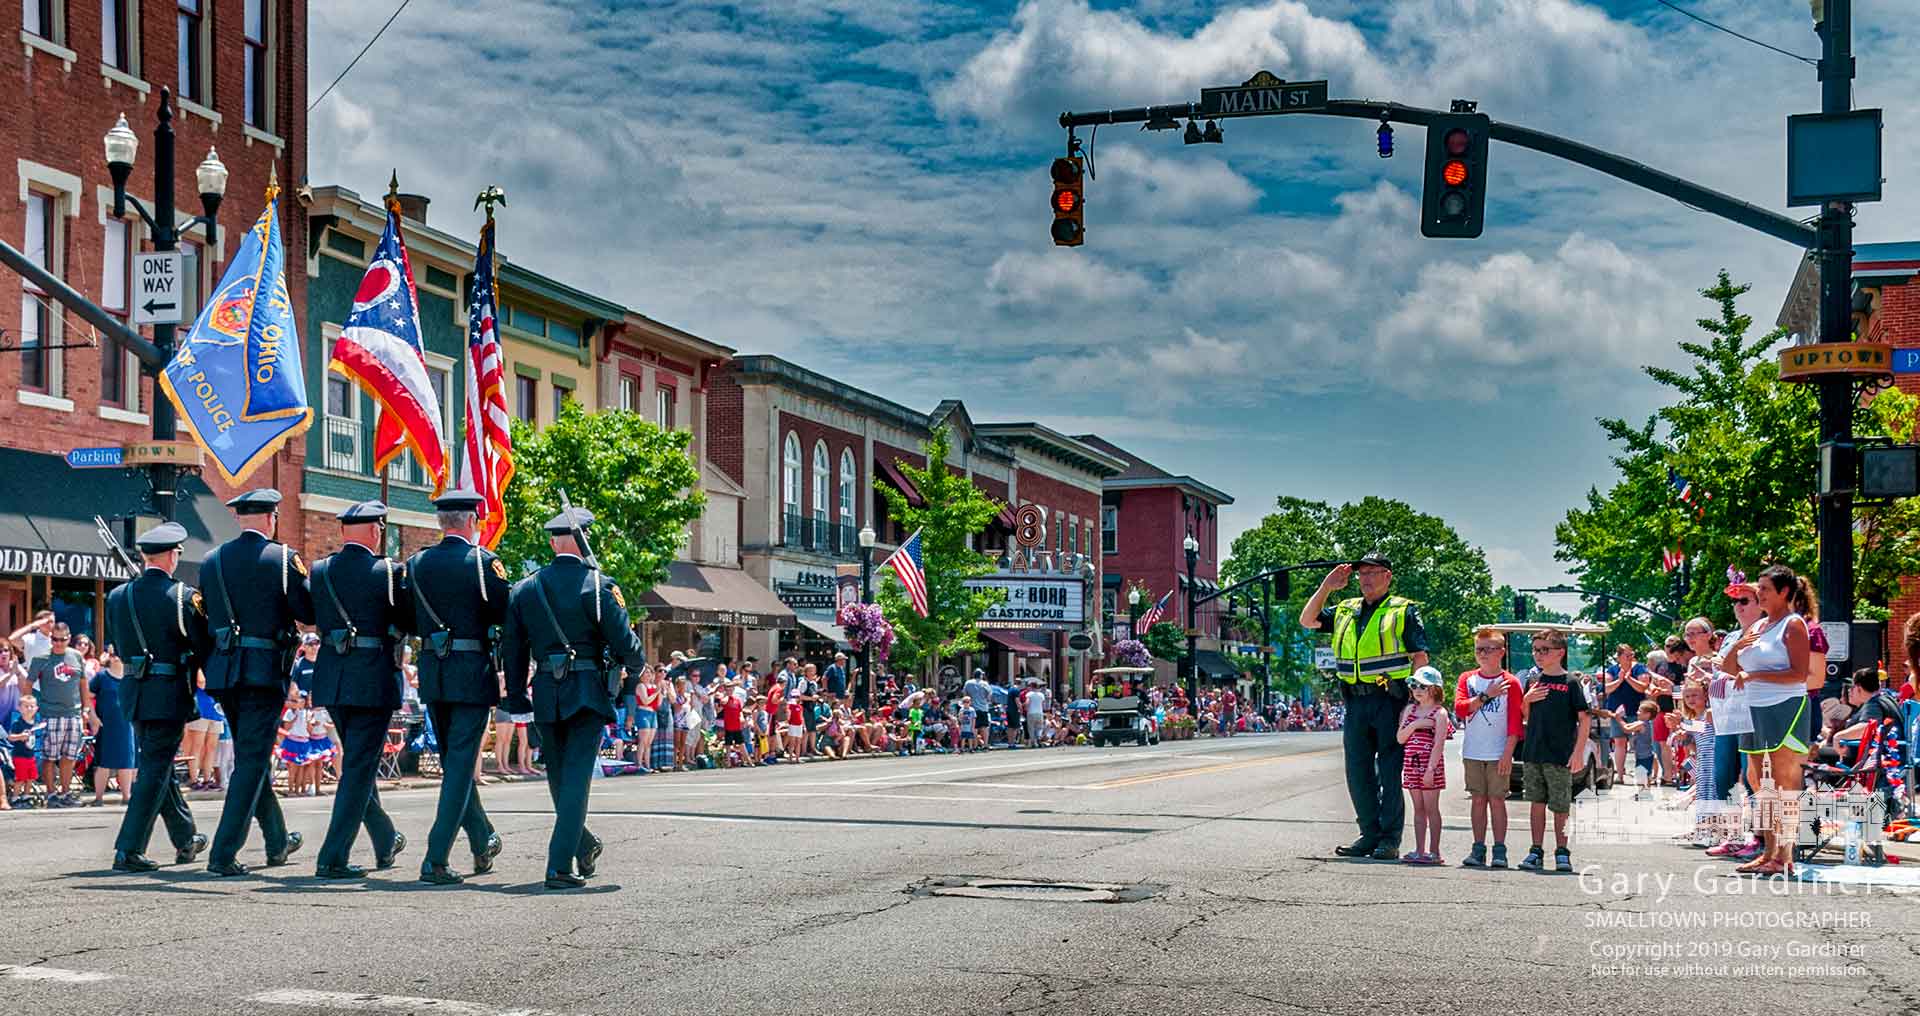 Westerville Reserve Officer Ted Bretthauer salutes as he stands with his three young charges as the police department Honor Guard passes at the lead of the 4th of July parade through Uptown Westerville. My Final Photo for July 4, 2019.